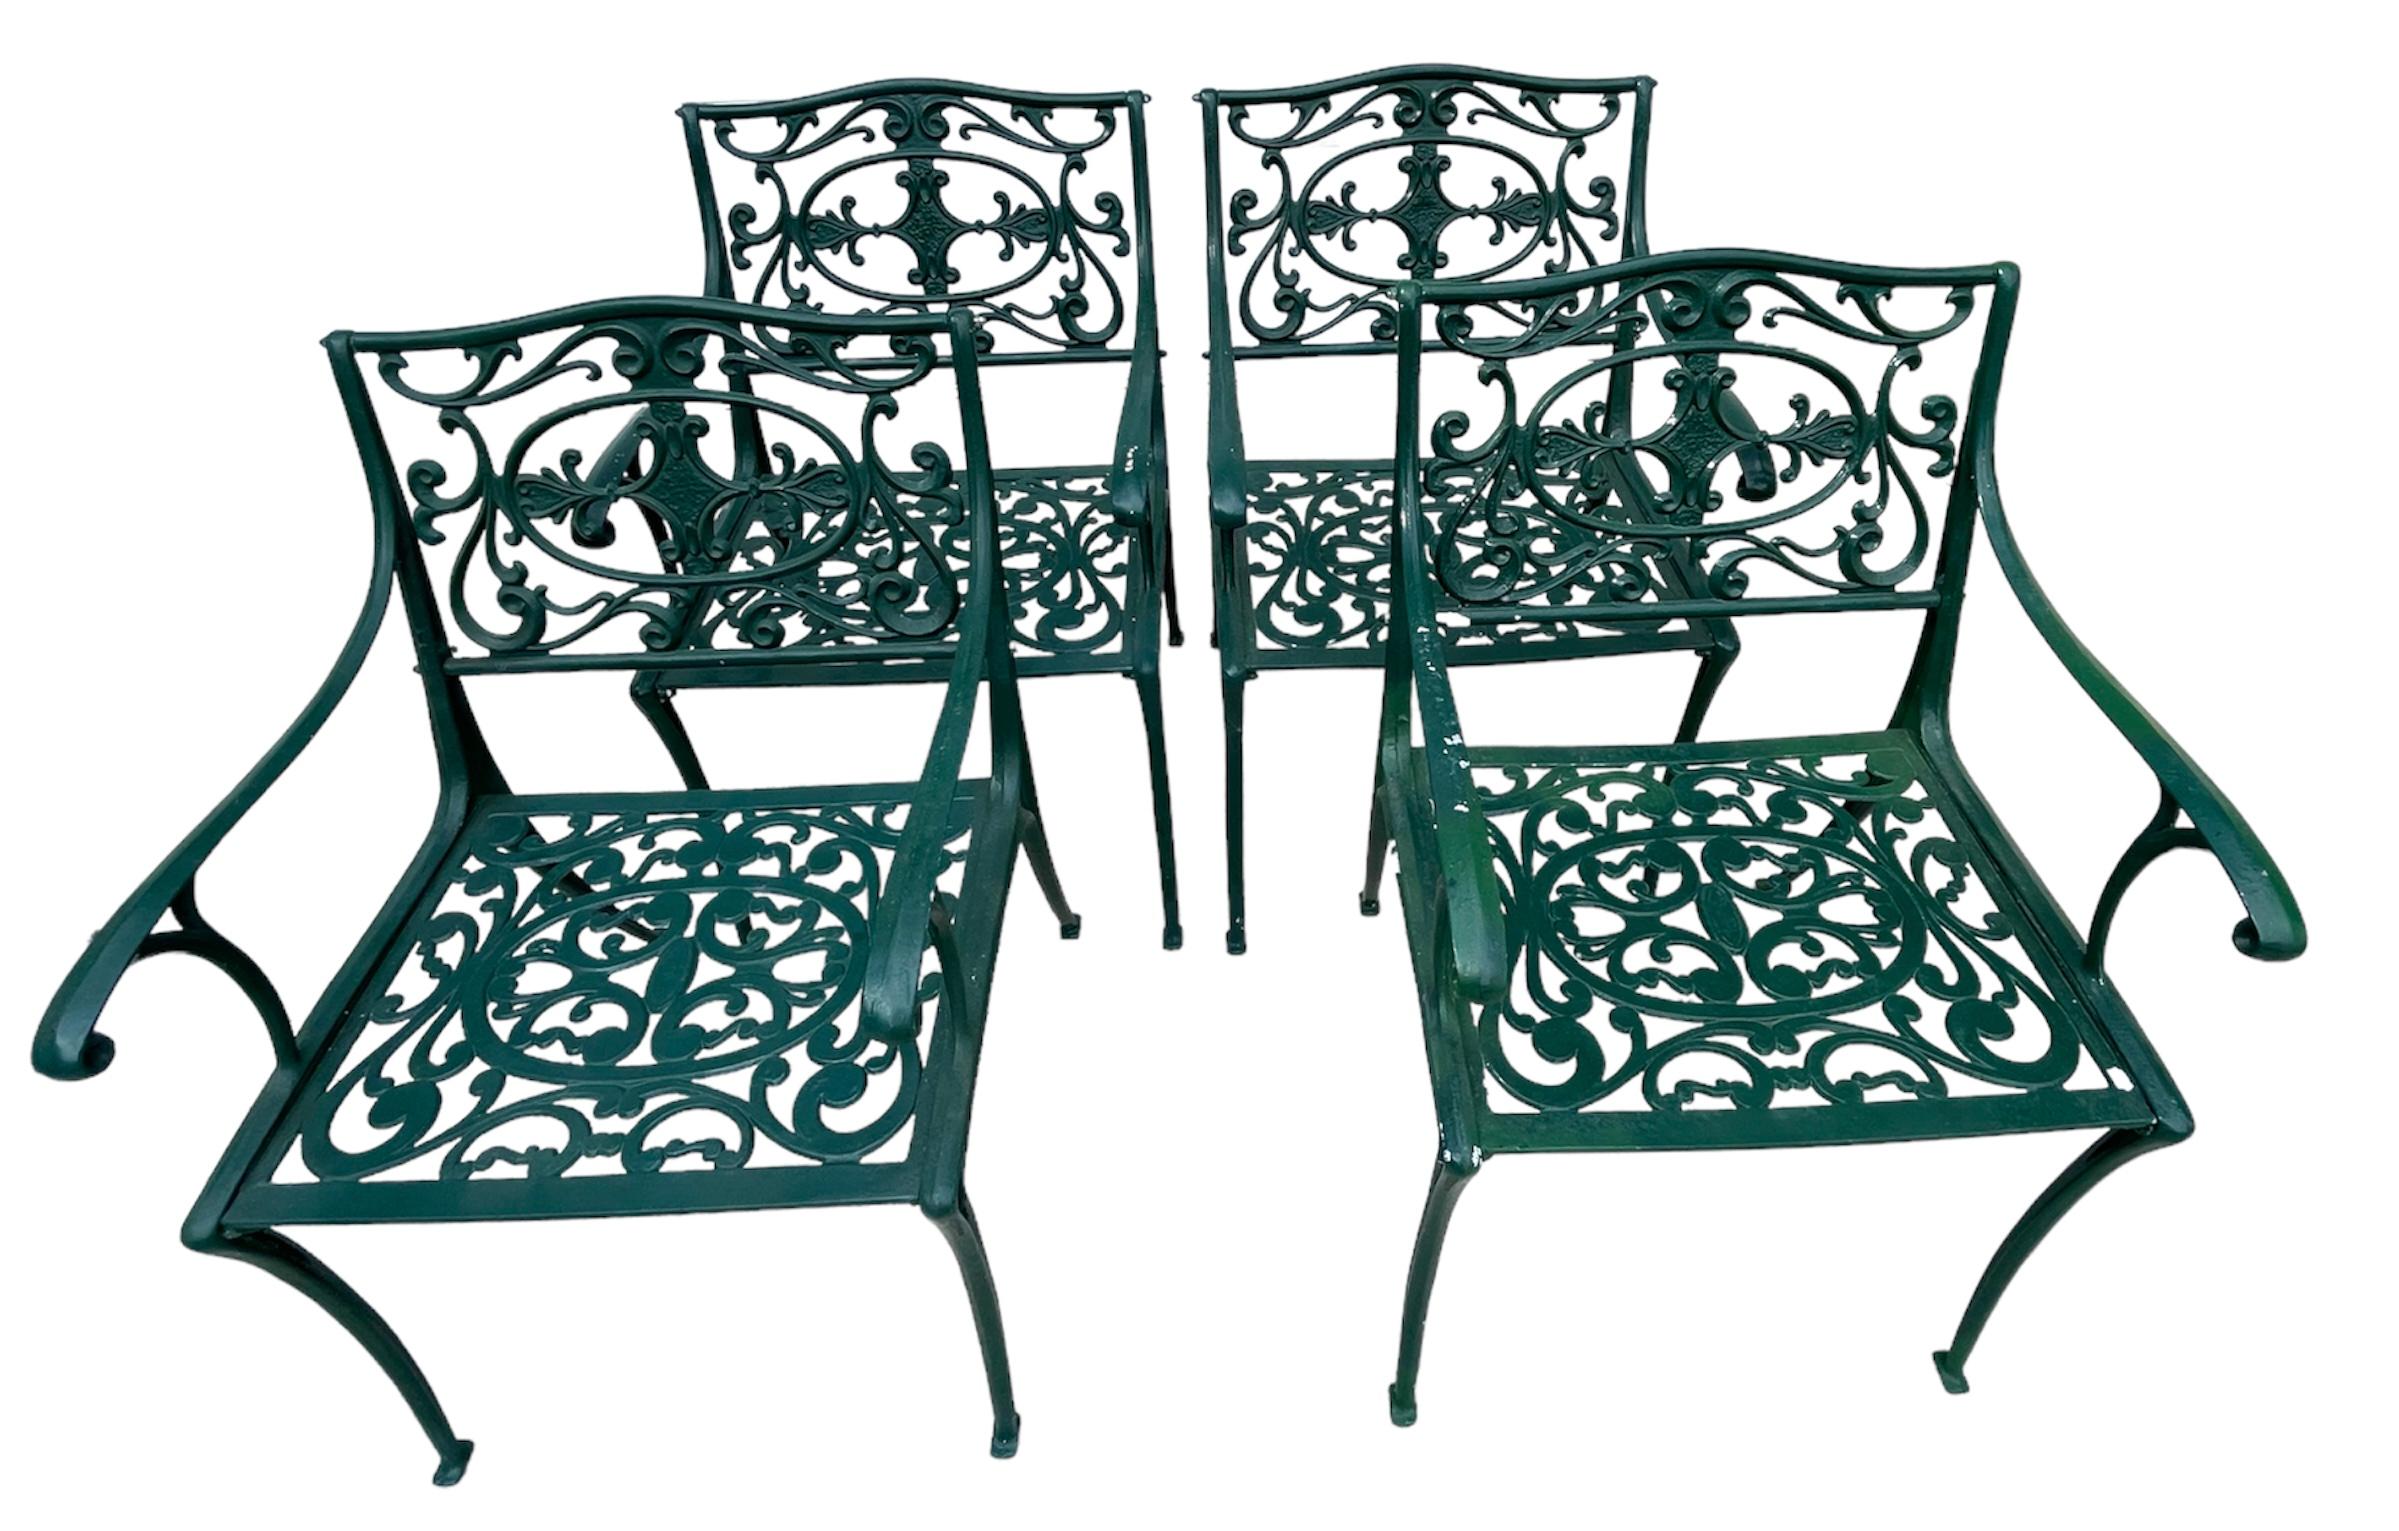 Colonial Casting 5 piece set, table and 4 arm chairs in a hunter green. Solid and not to heavy in weight for easy entertaining.  
32.5 W x 28H Table
20Dx 20Wx 21H Arm chairs
More items available from this collection